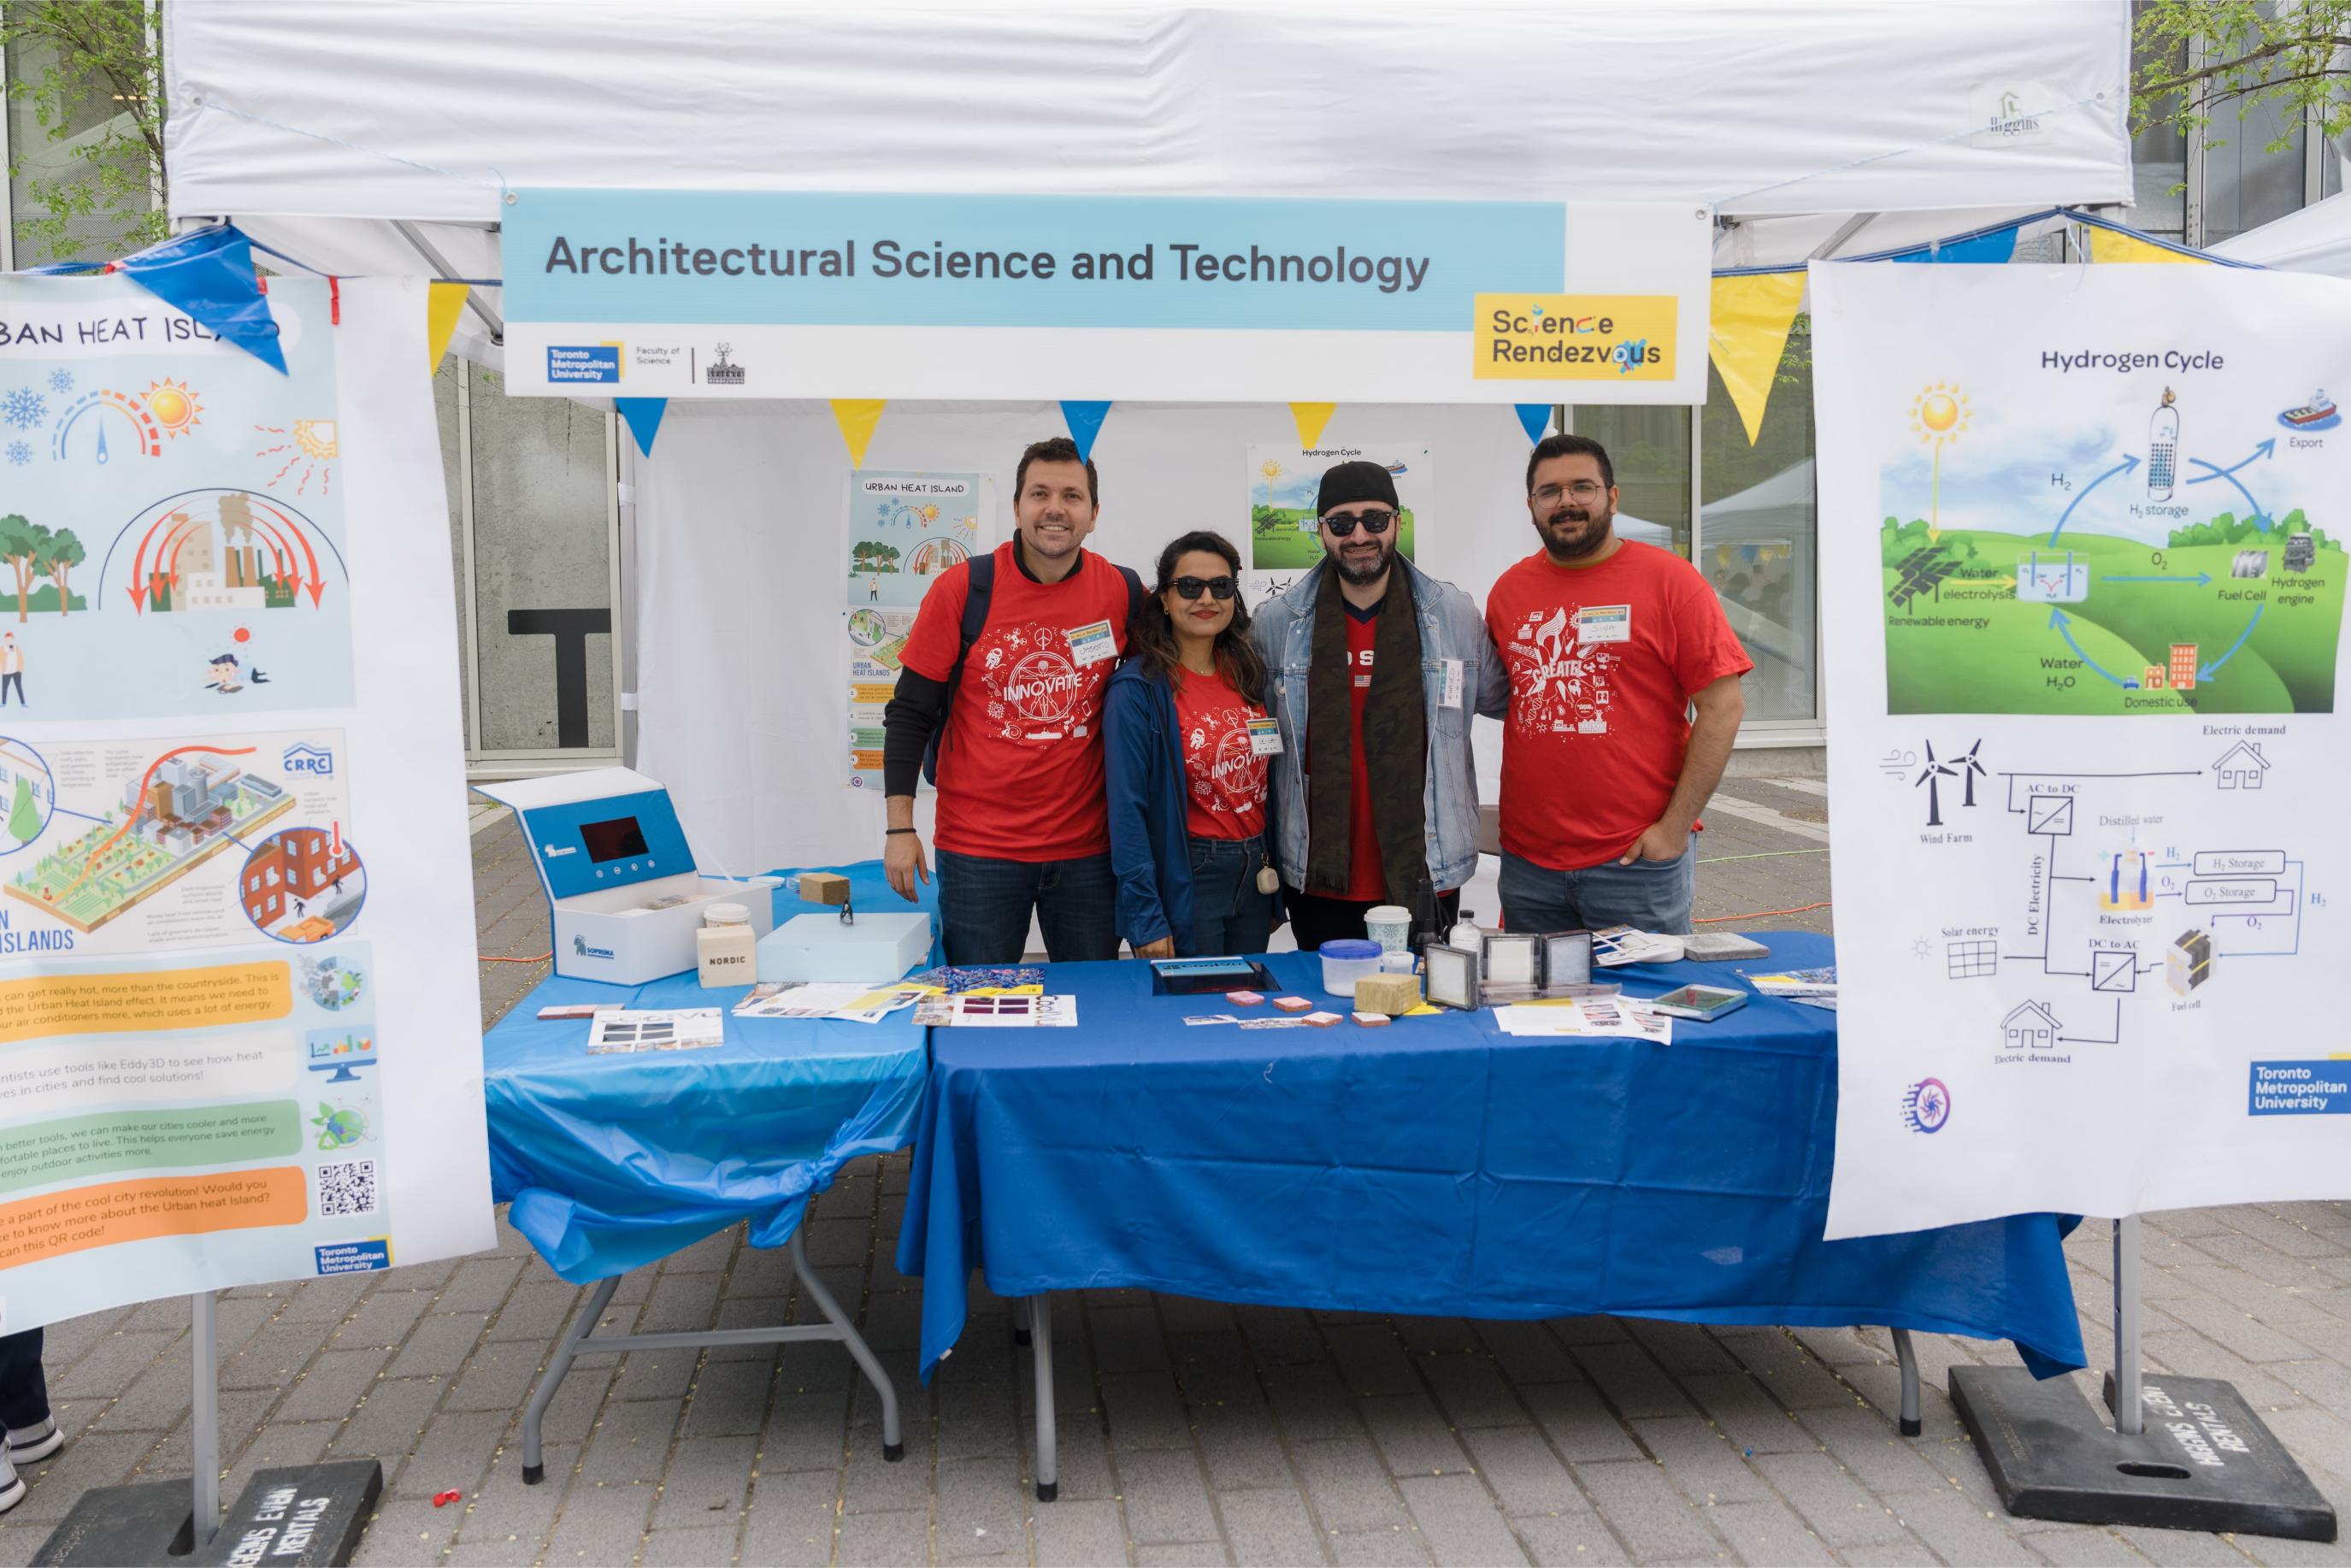 Volunteers posing at the Architectural Science and Technology Booth.